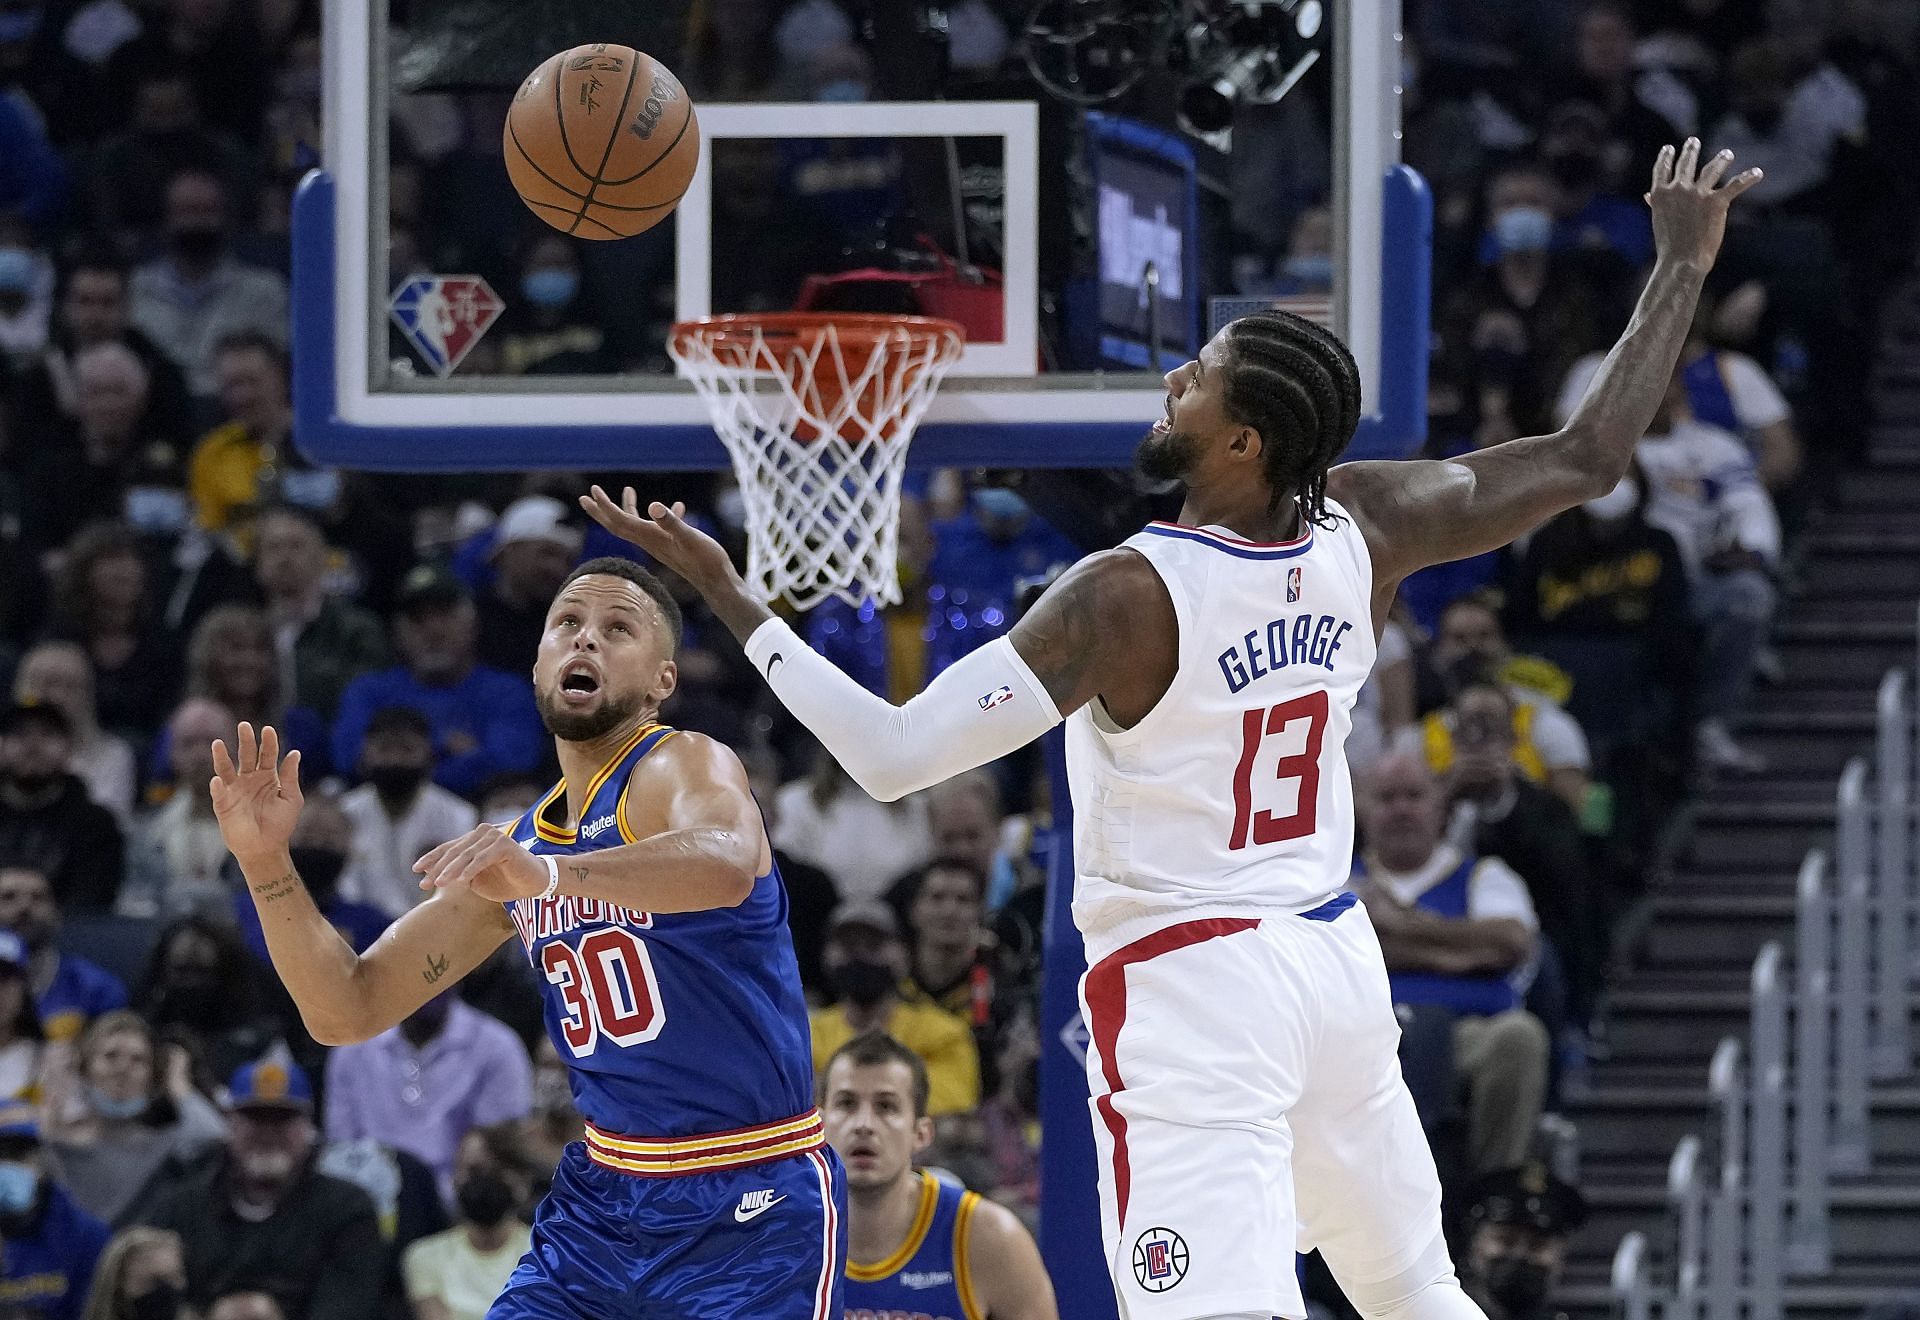 Stephen Curry of the Golden State Warriors steals the ball from Paul George of the LA Clippers